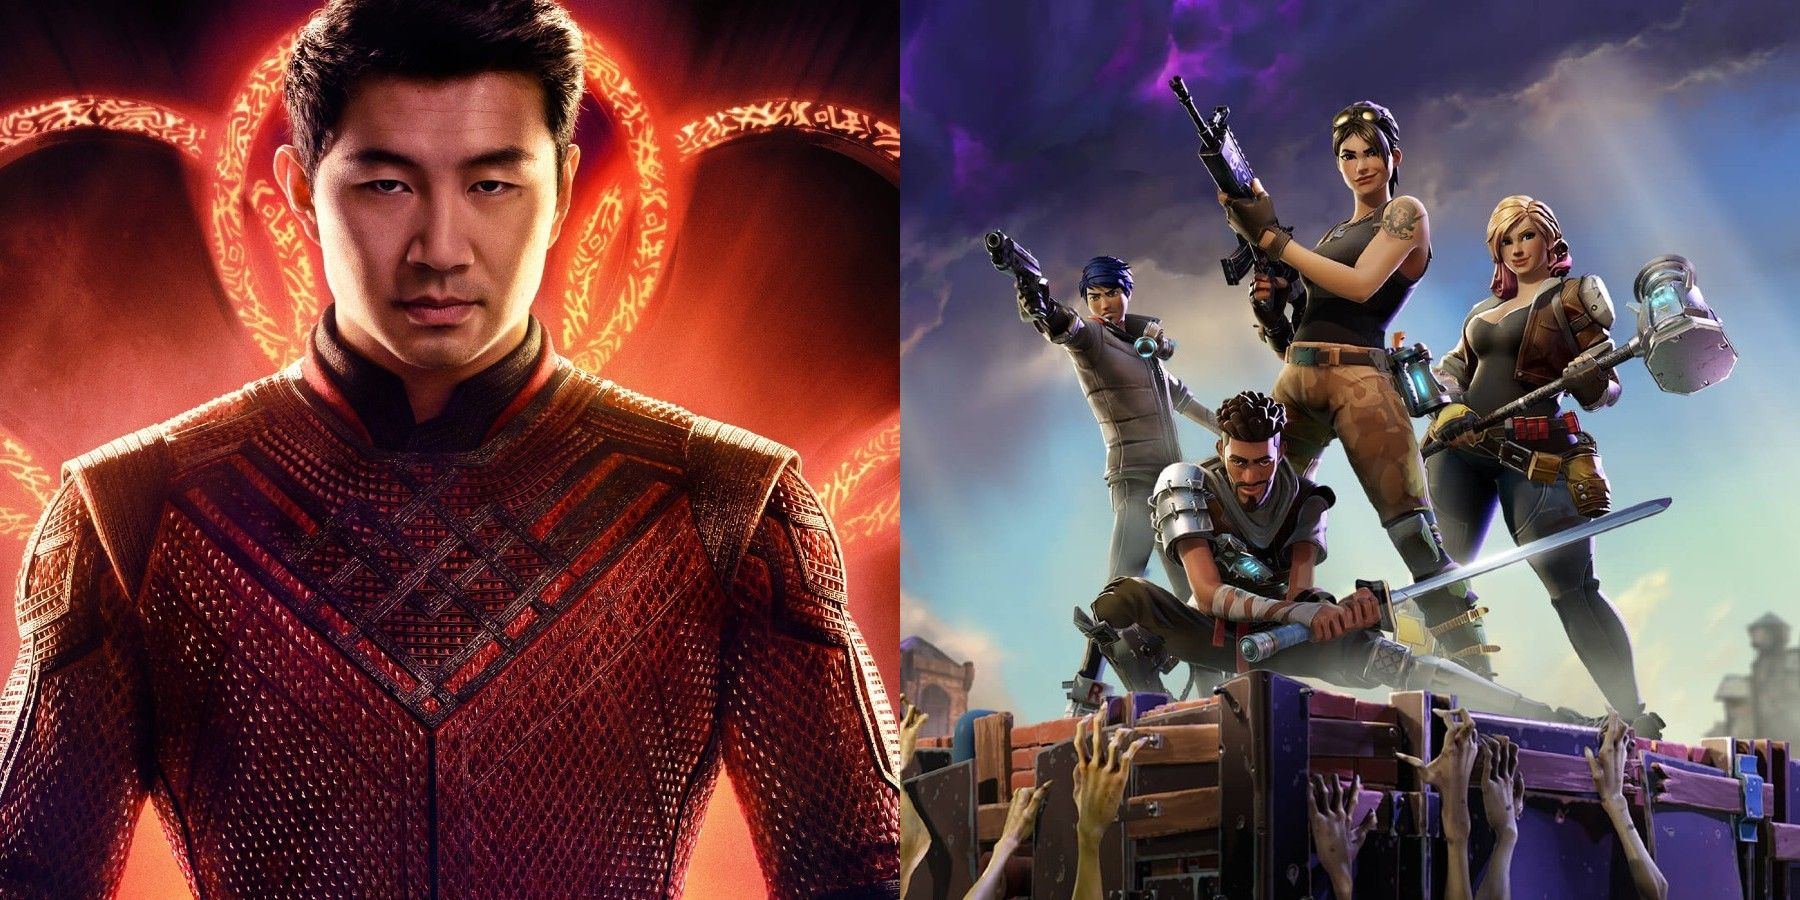 Fortnite Releases Shang-Chi Skin to Celebrate Movie Premiere